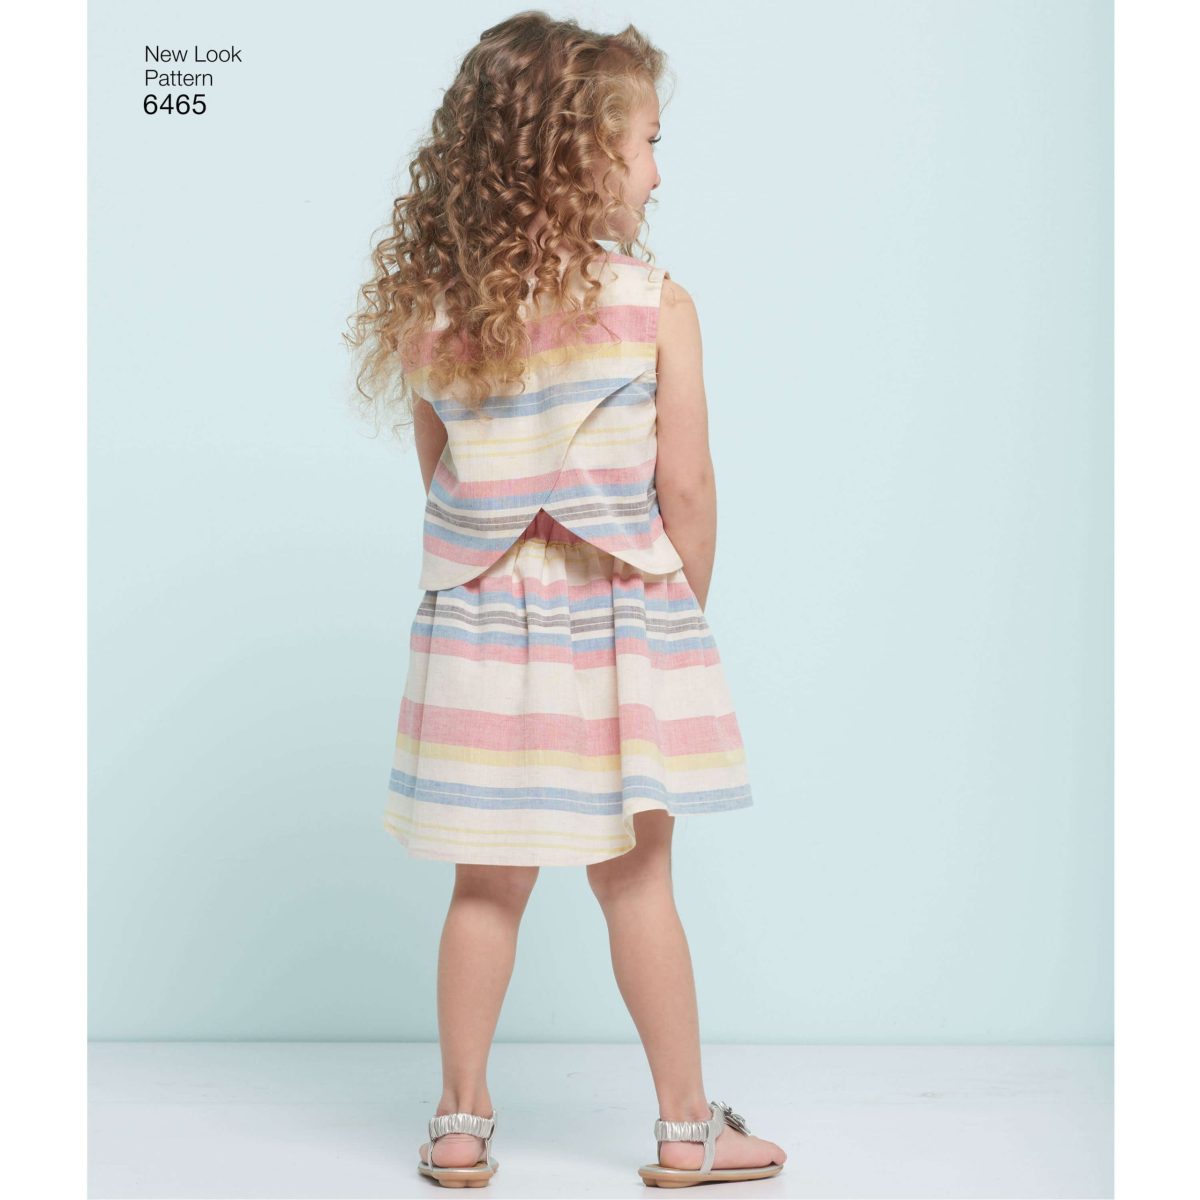 New Look Sewing Pattern N6465 Child's Easy Top, Skirt and Shorts